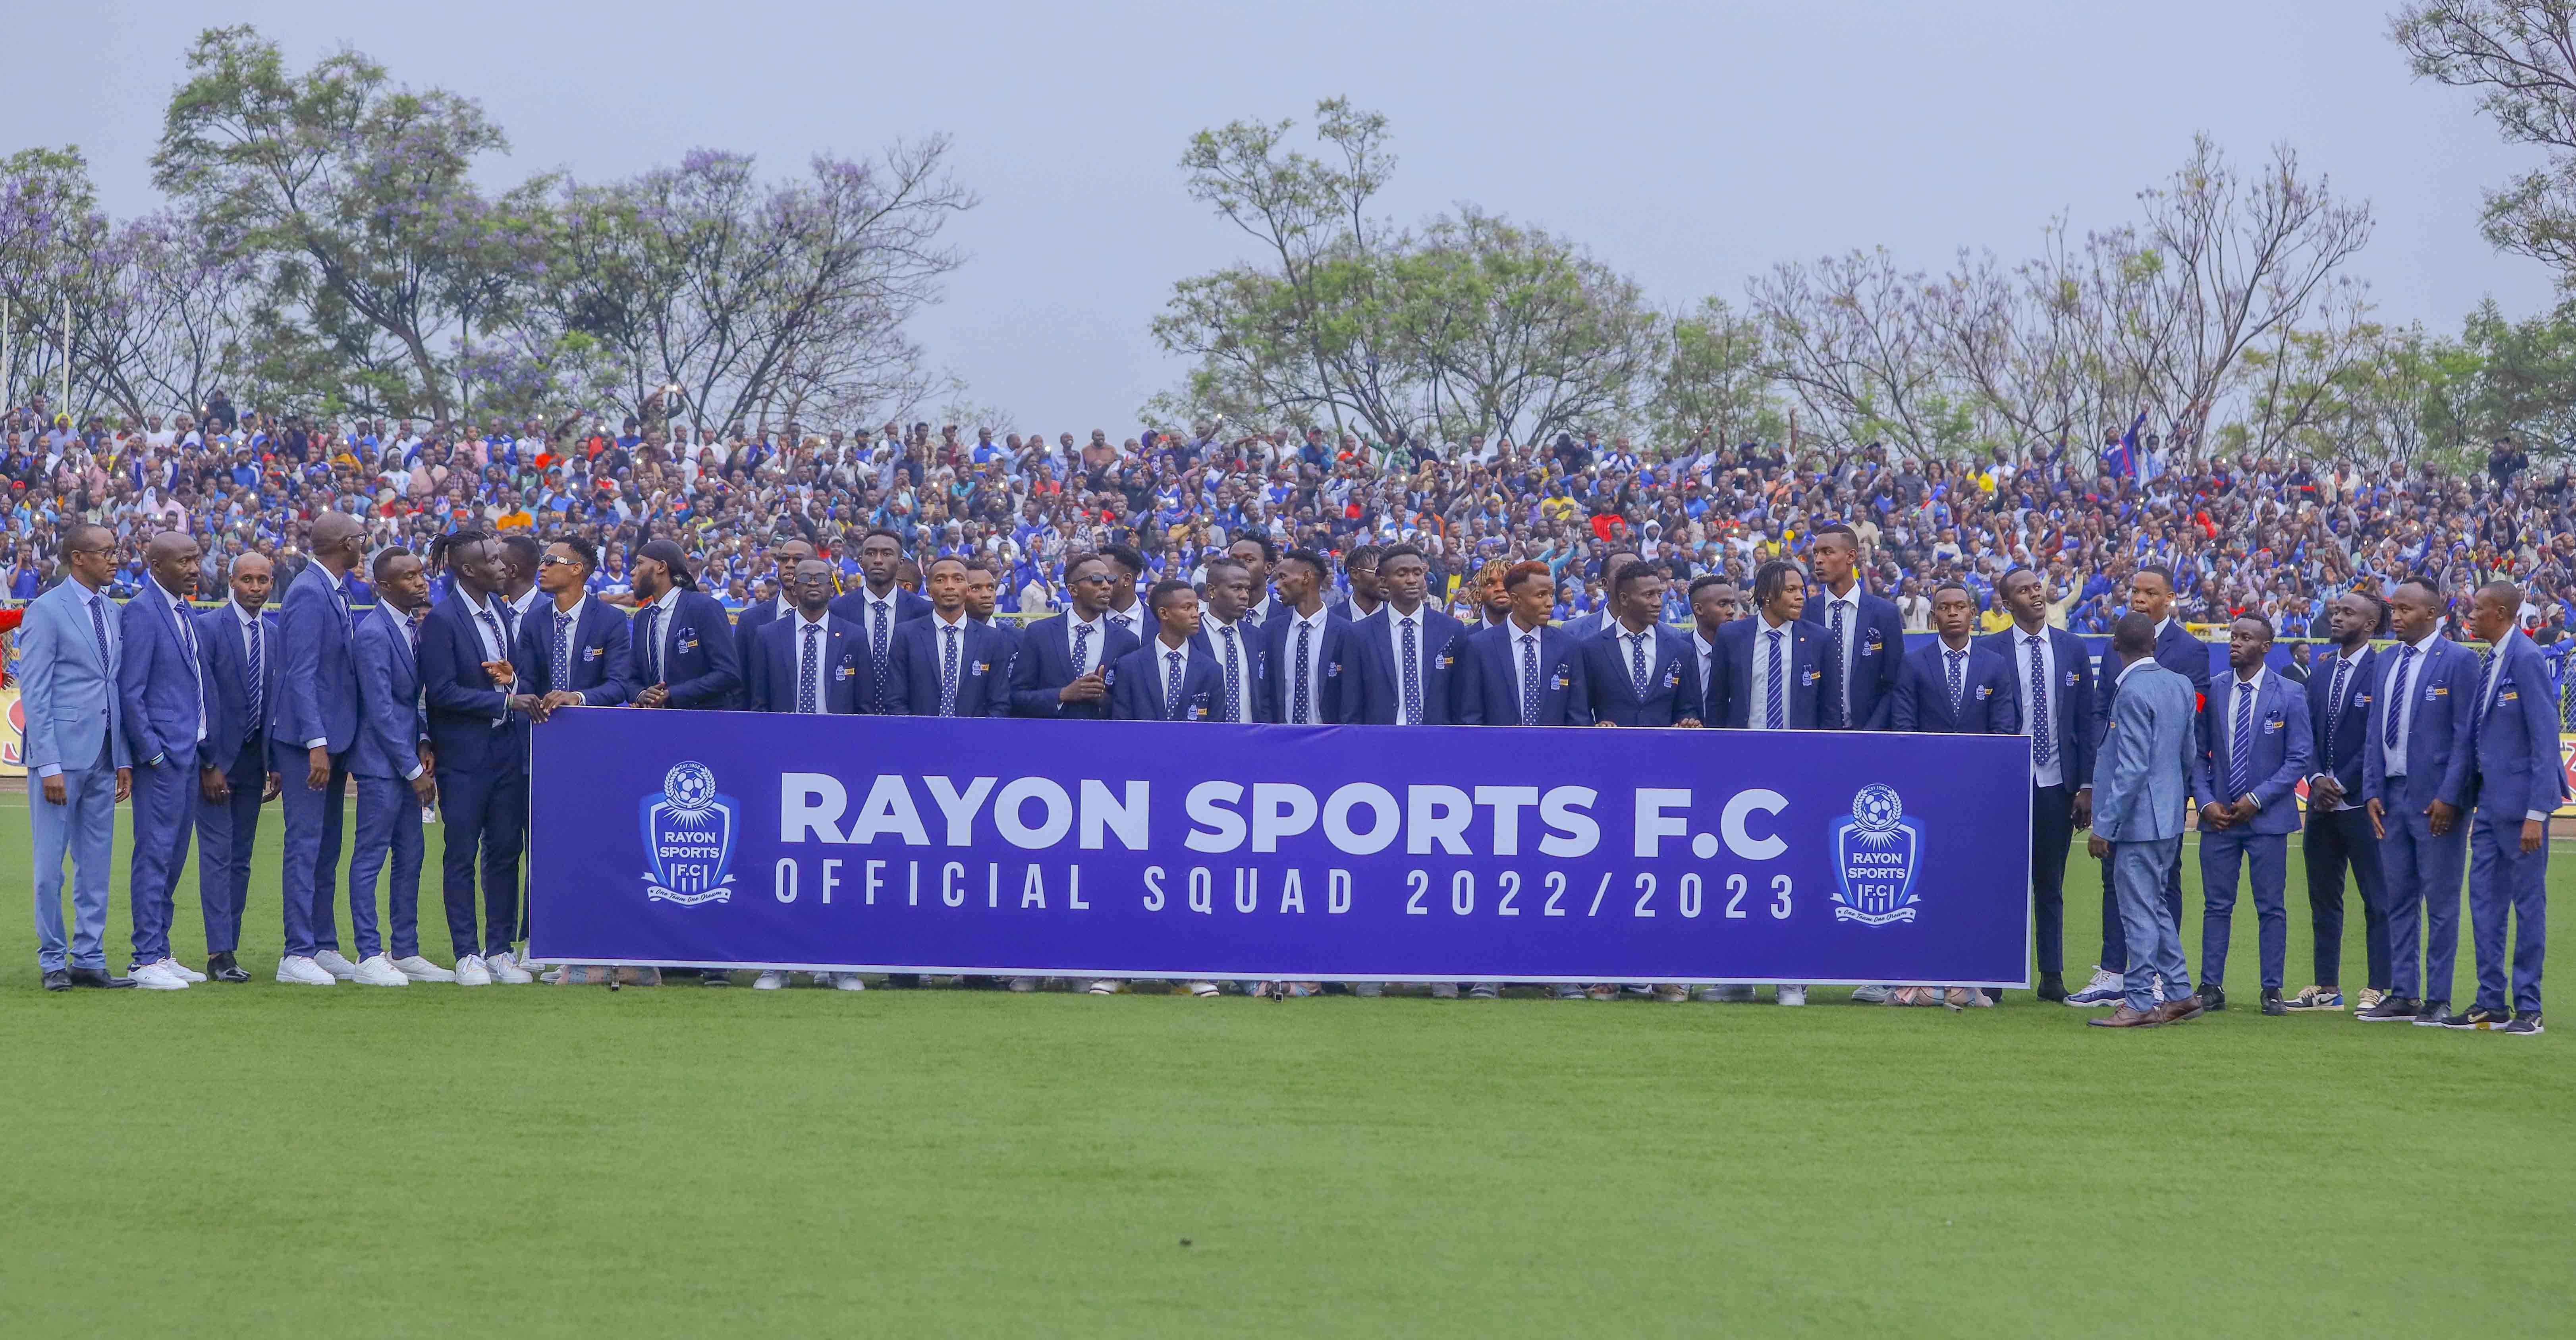 Rayon Sports FC - The most popular and only citizen-owned club in